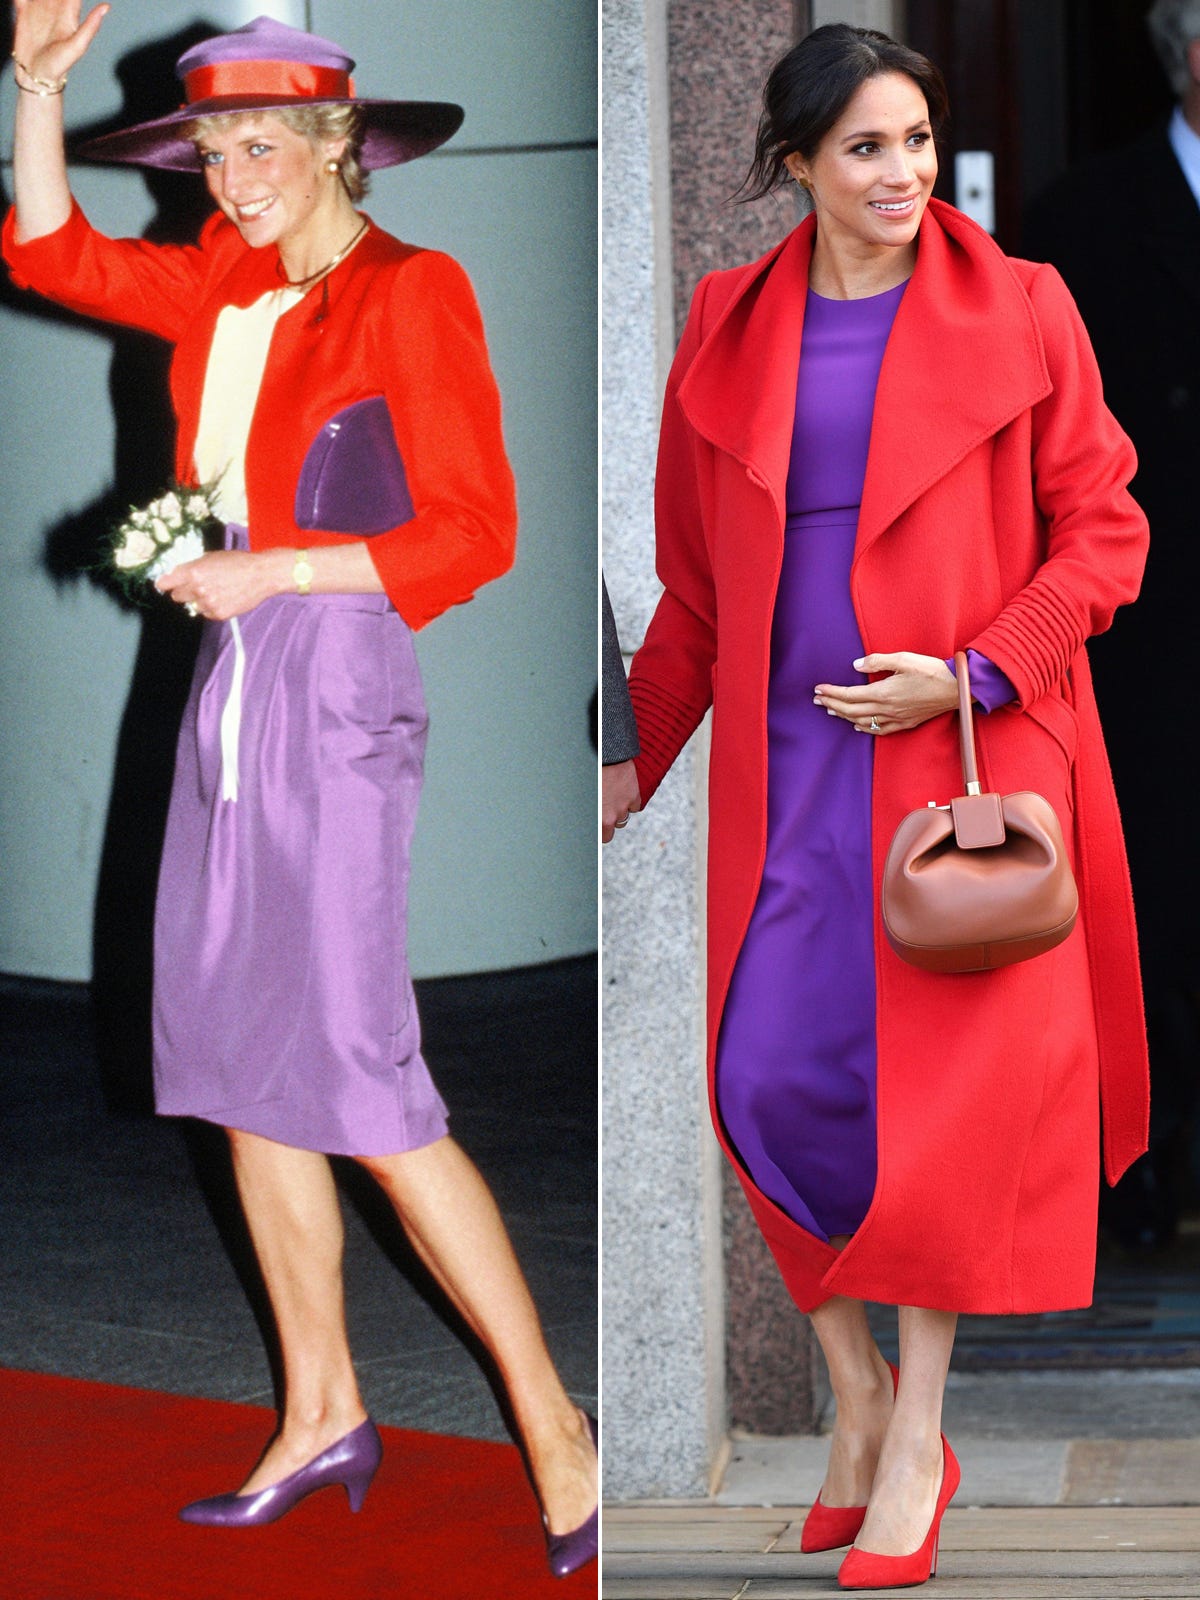 Meghan Markle Copies Princess Diana&amp;#39;s Purple and Red Outfit | PEOPLE.com